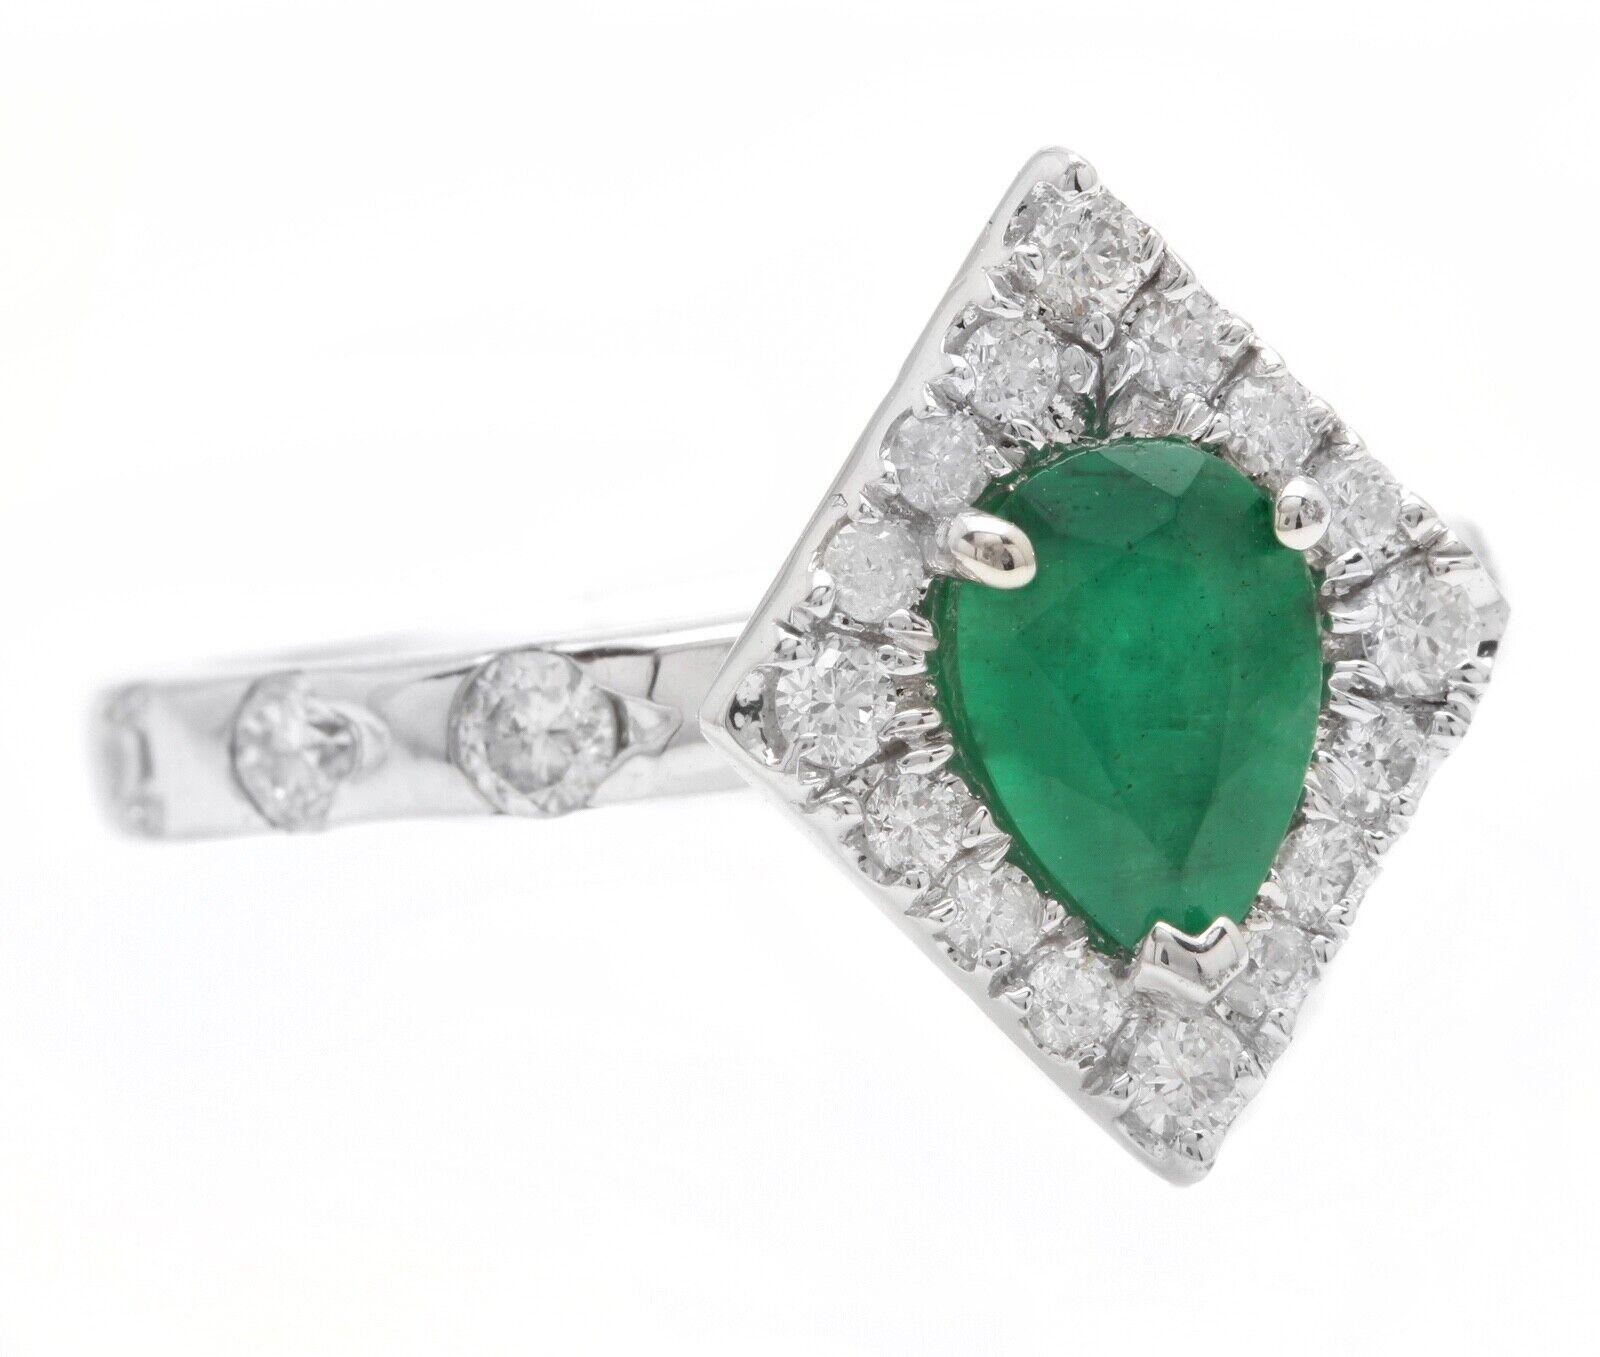 1.30 Carats Natural Emerald and Diamond 14K Solid White Gold Ring

Suggested Replacement Value: $4,500.00

Total Natural Green Emerald Weight is: Approx. 1.00 Carats 

Emerald Measures: Approx. 8.00 x 6.00mm

Natural Round Diamonds Weight: Approx.